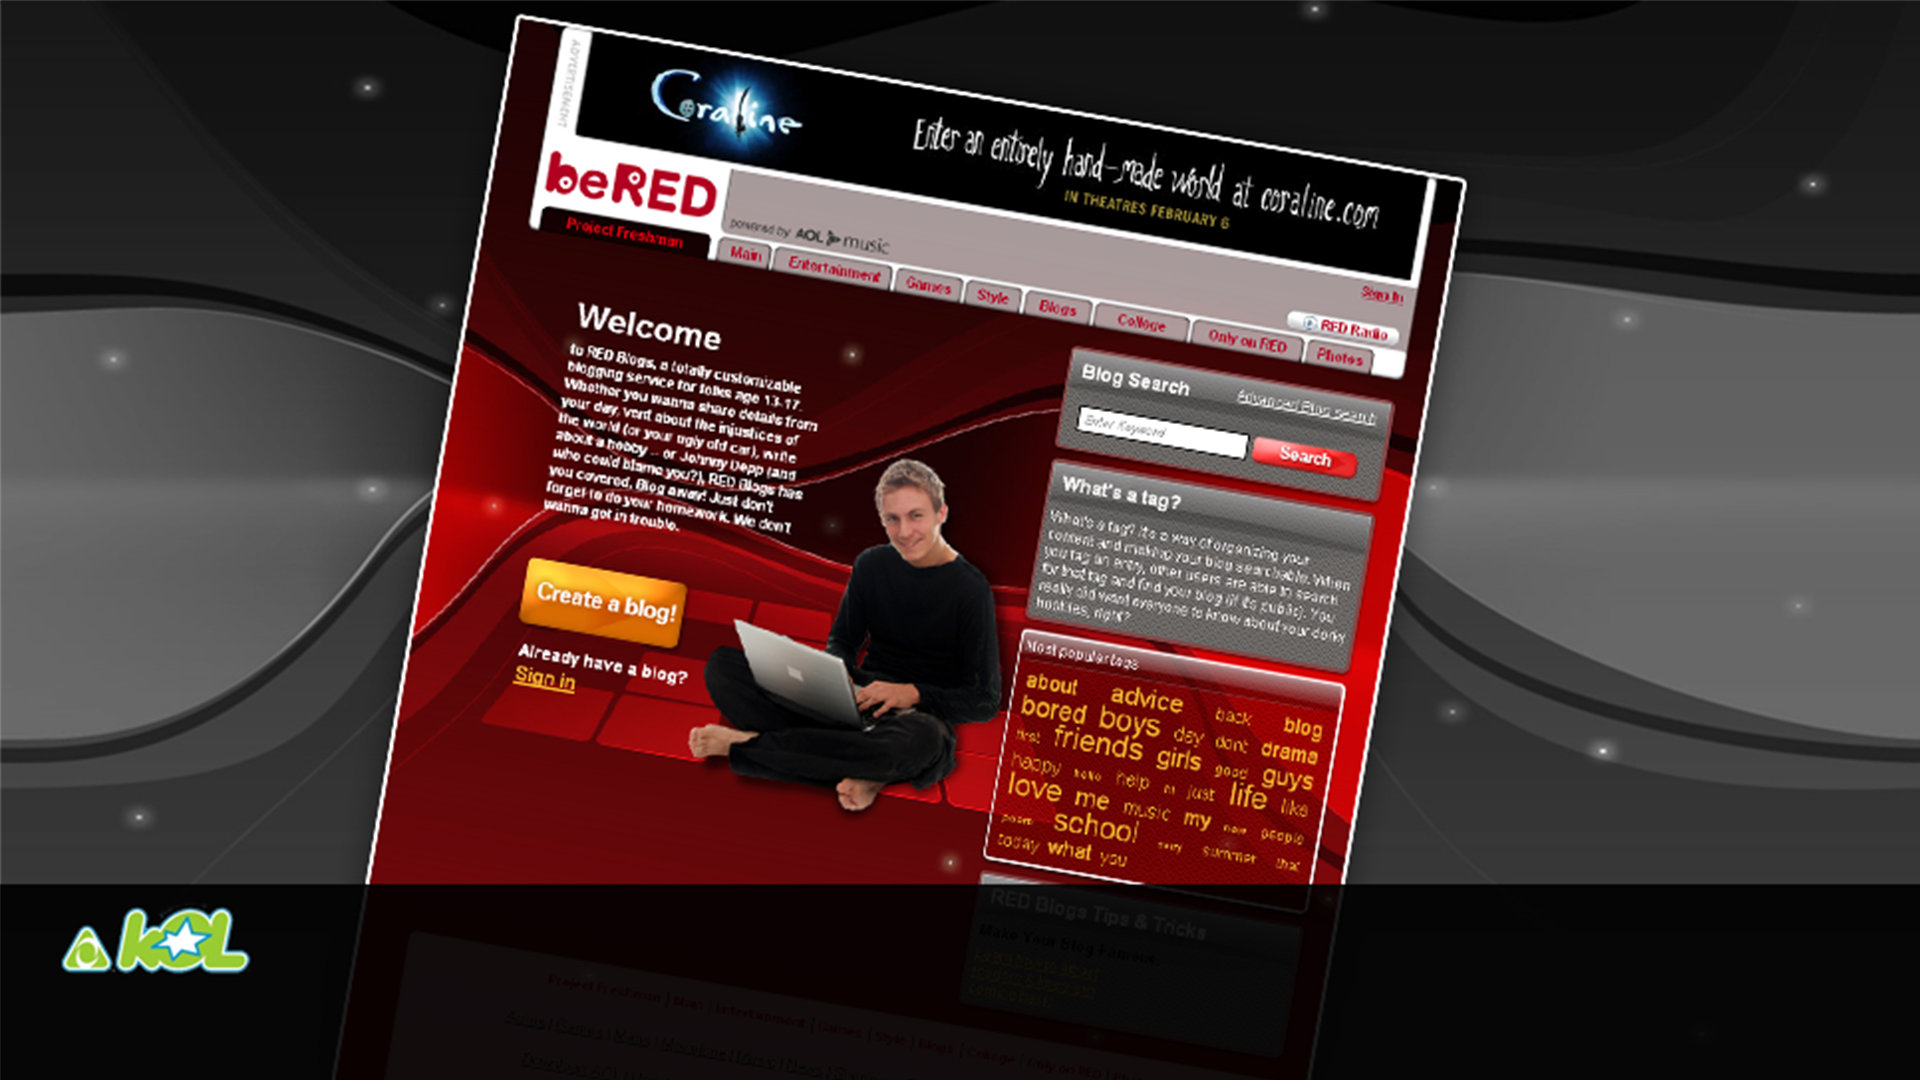 AOL Red Blogs